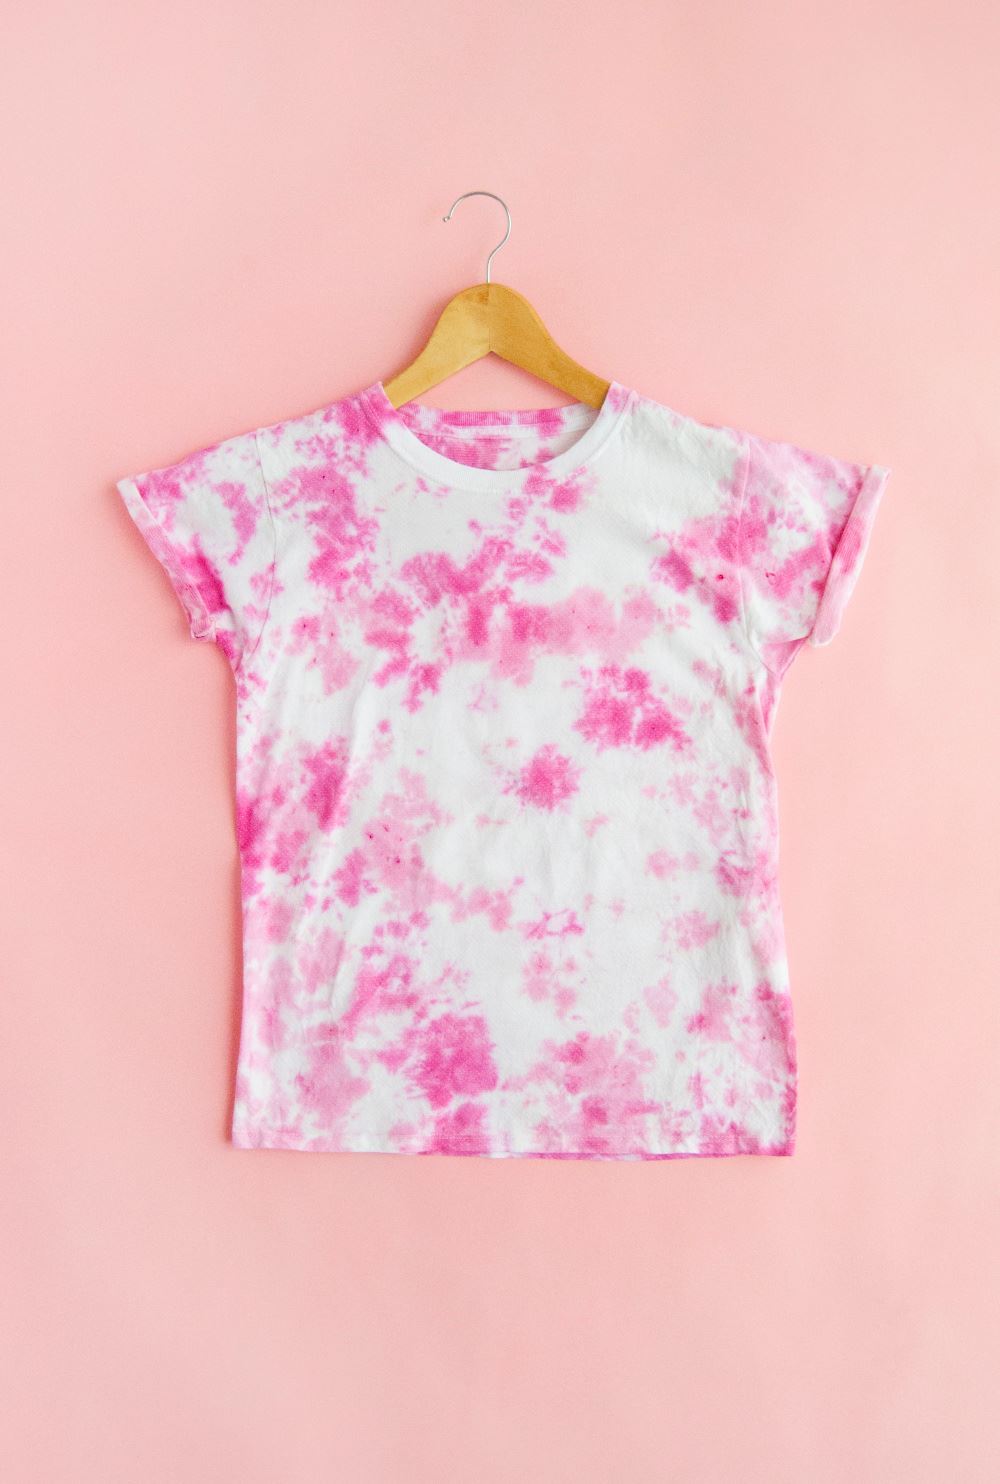 Candy-Inspired Two-Minute Tie Dye Shirts 